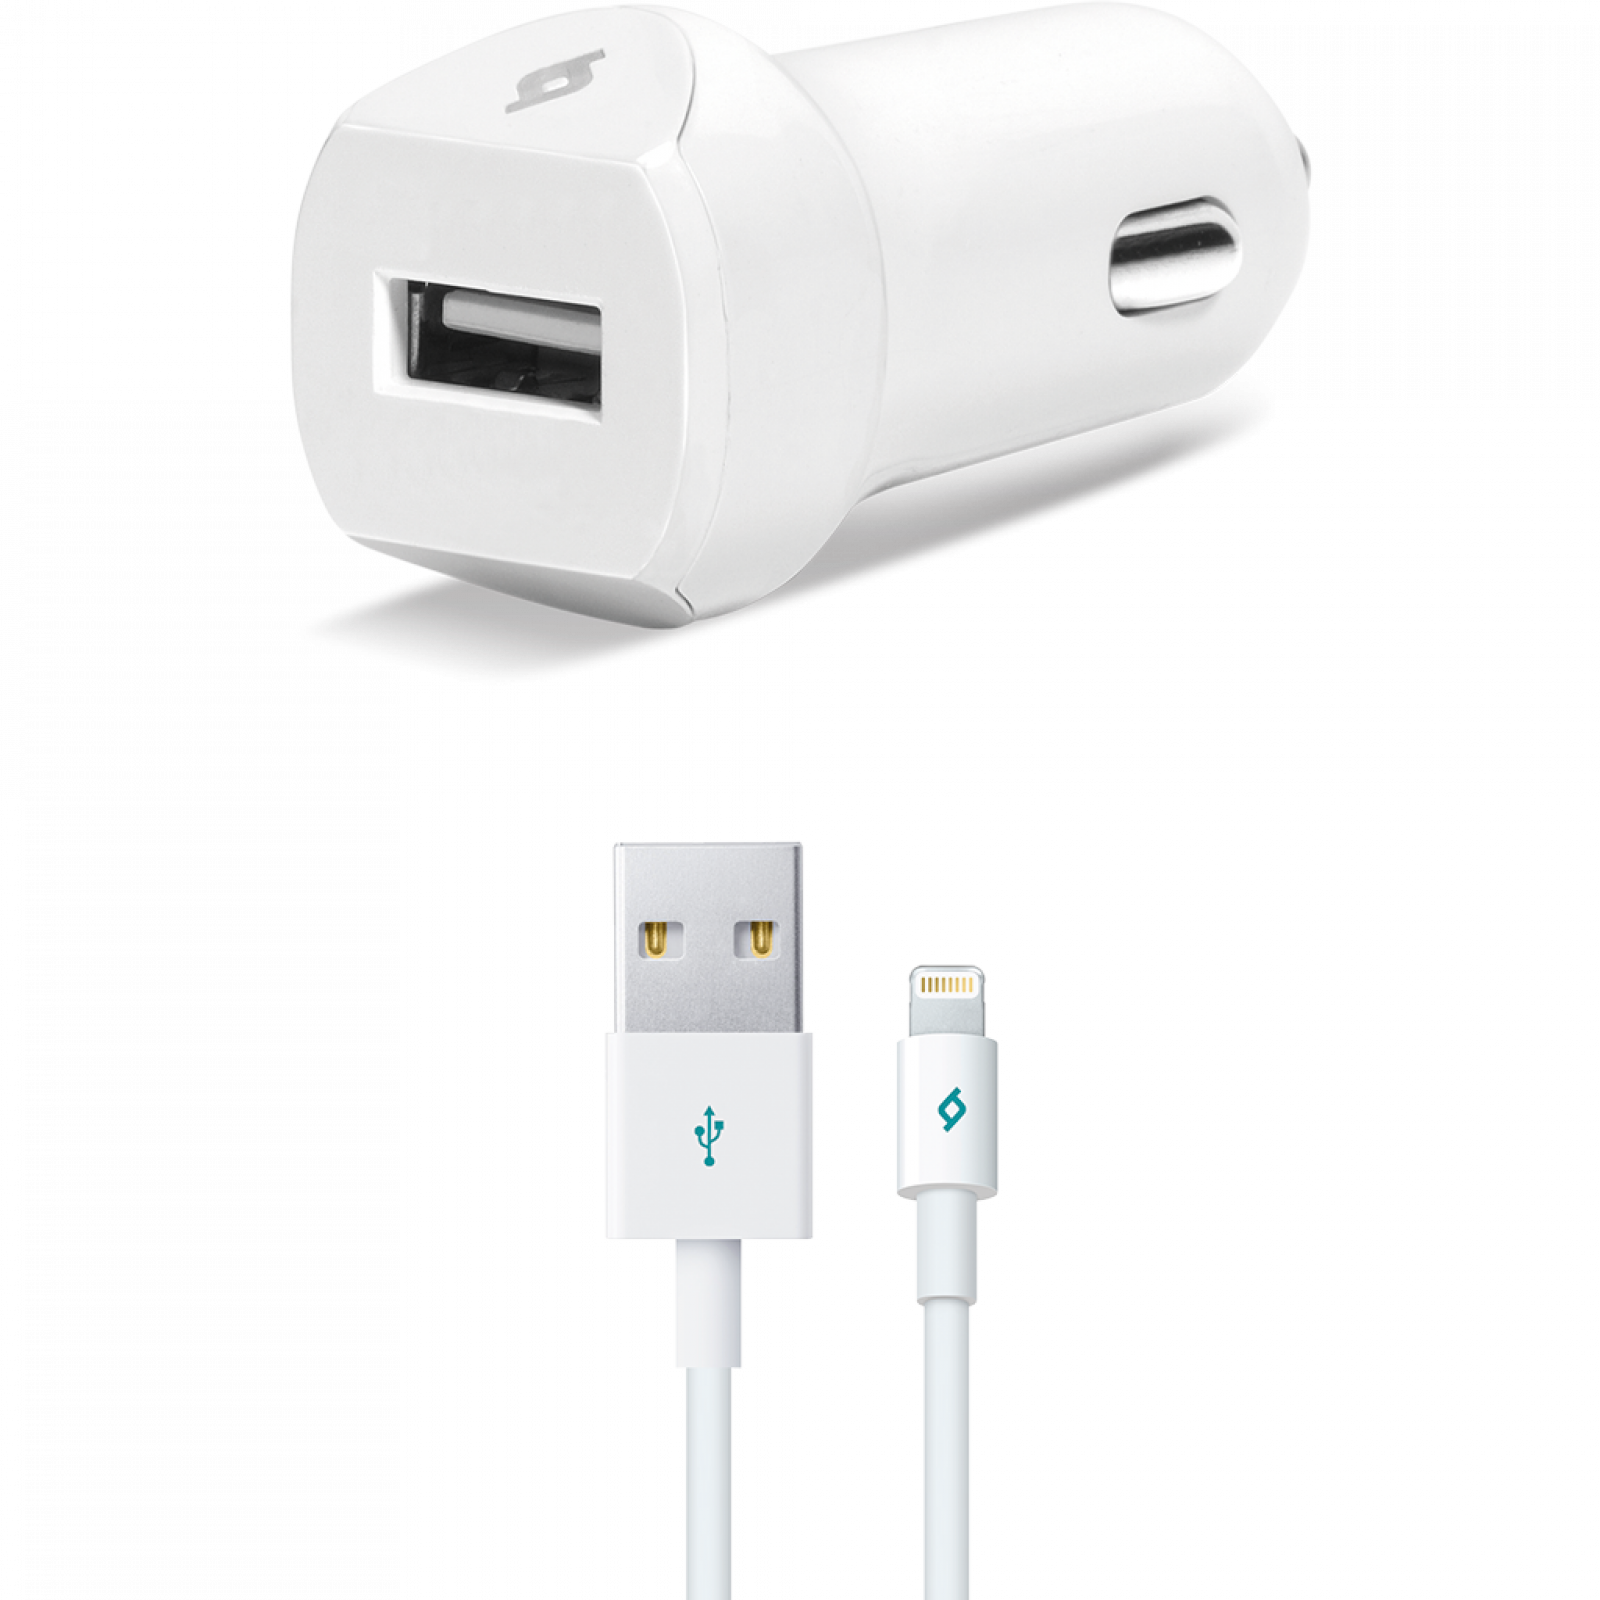 Зарядно за кола 12V SpeedCharger USB In-Car Charger, 2.1A, incl. Lightning Cable - Бяло